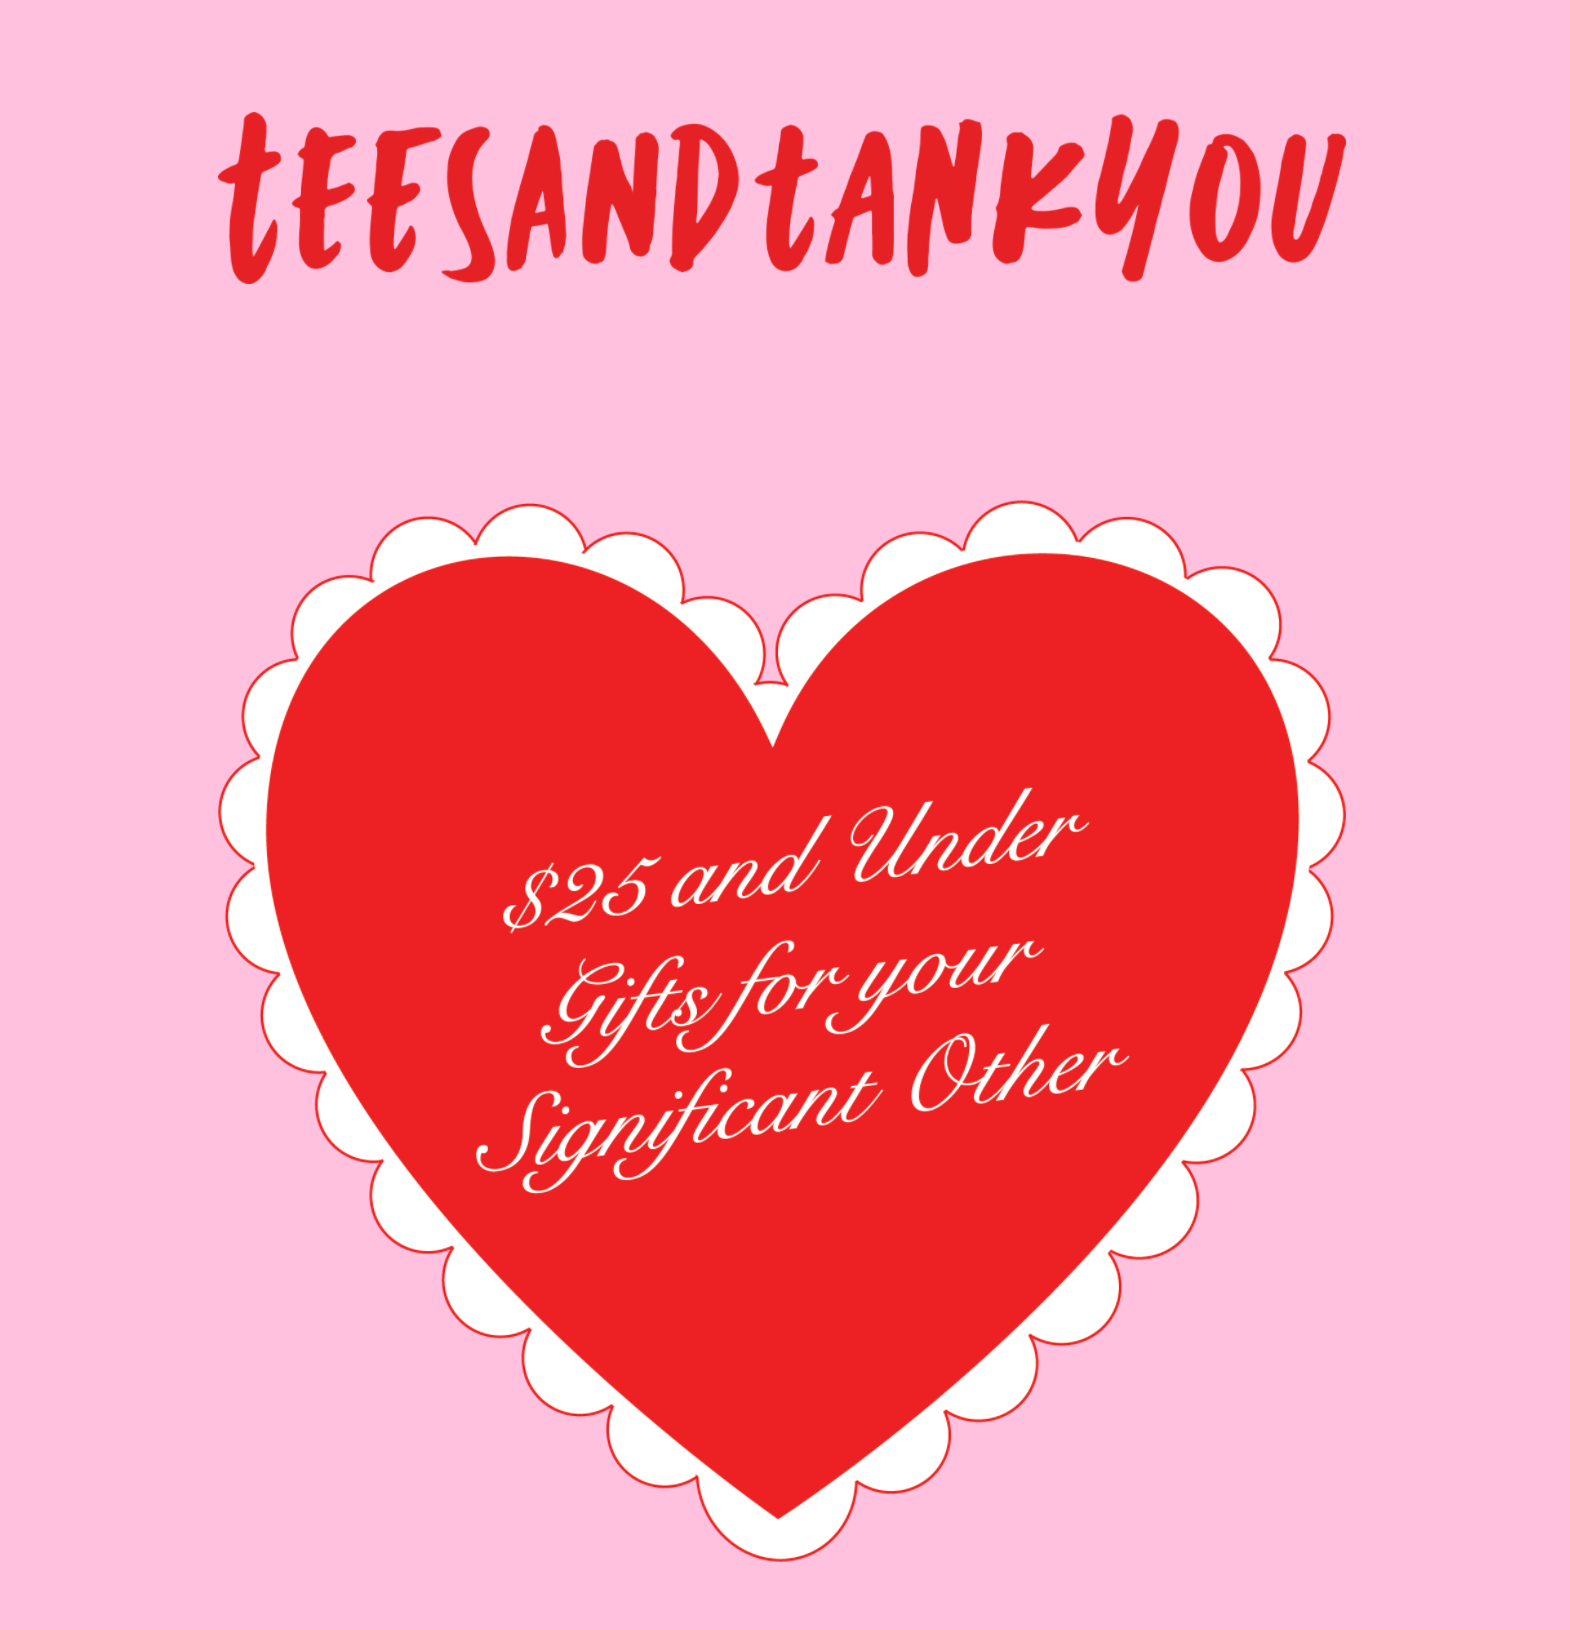 $25 & Under Valentine's Day Gifts for your S/O